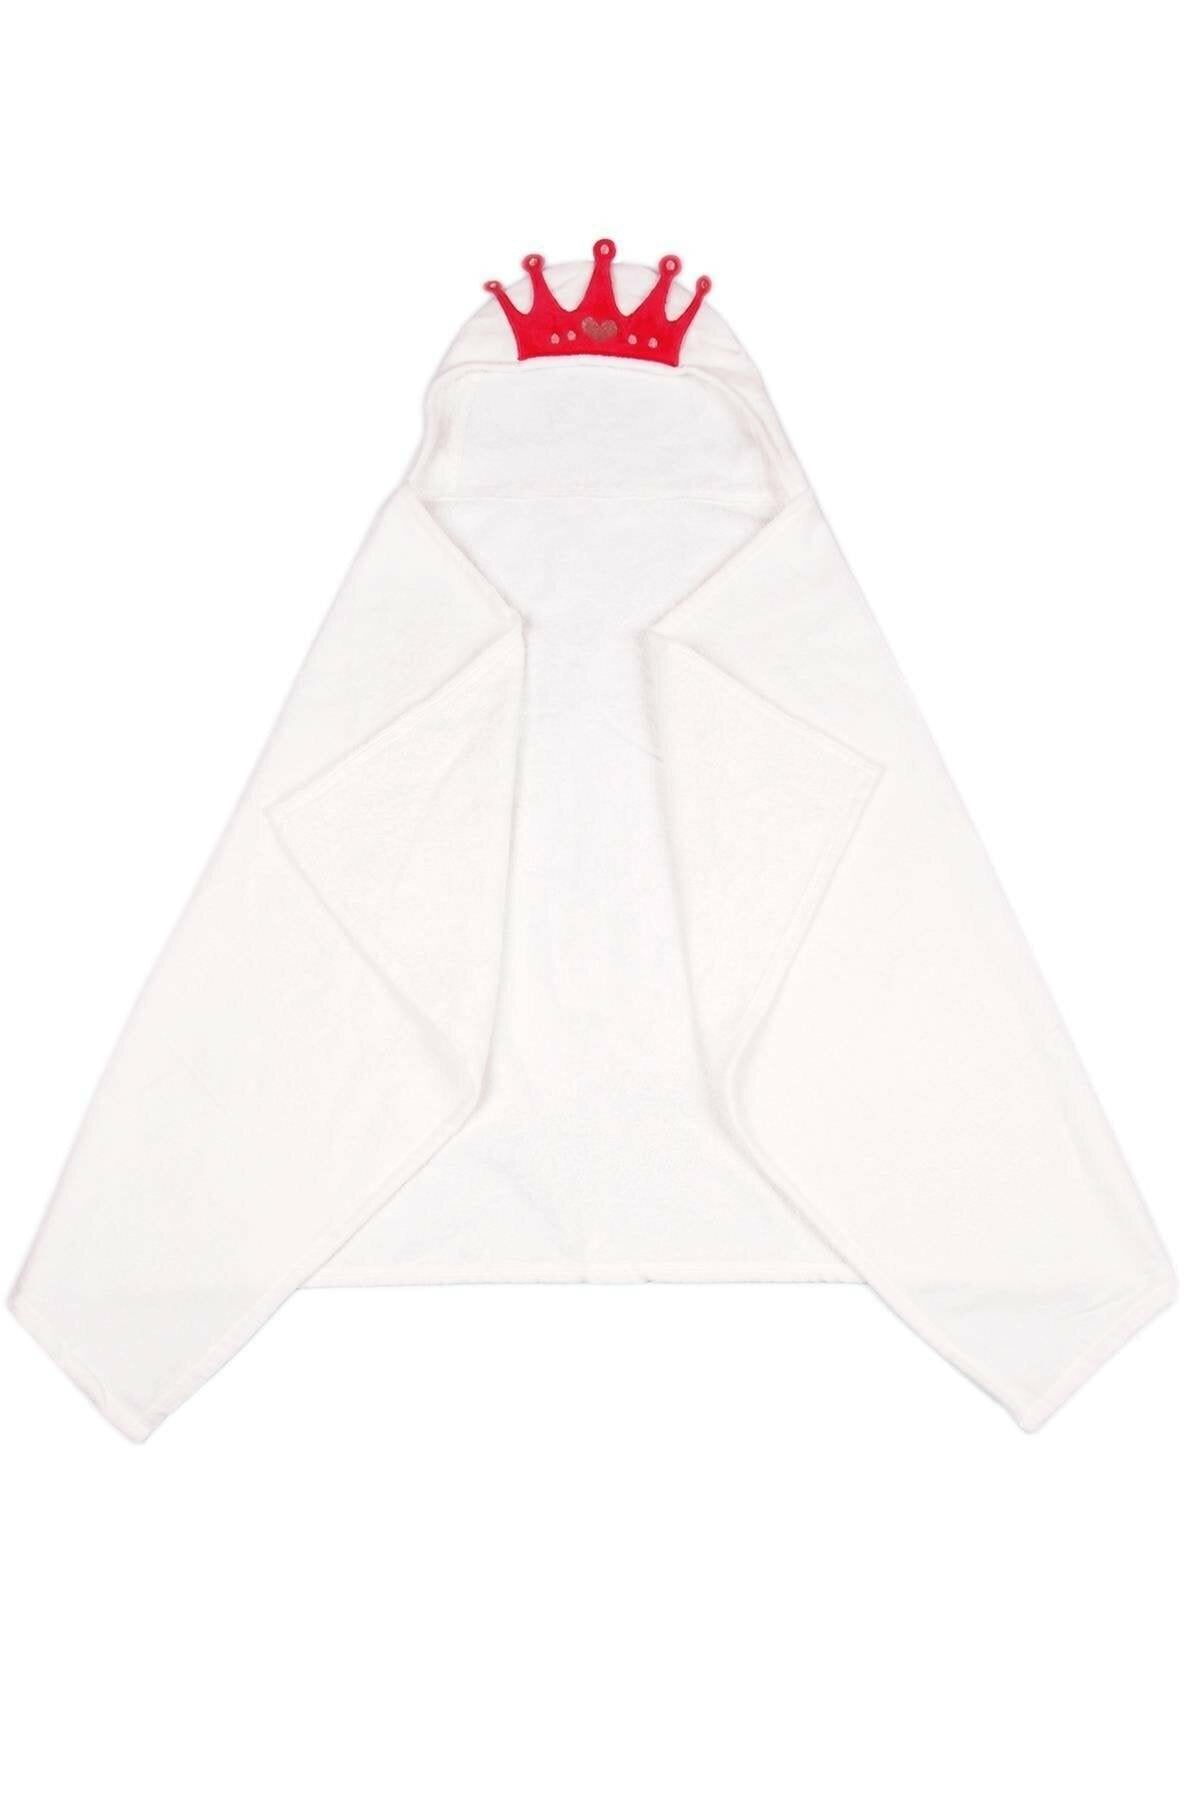 100% Cotton Queen Hooded Kids Towel Poncho - sinnohome 